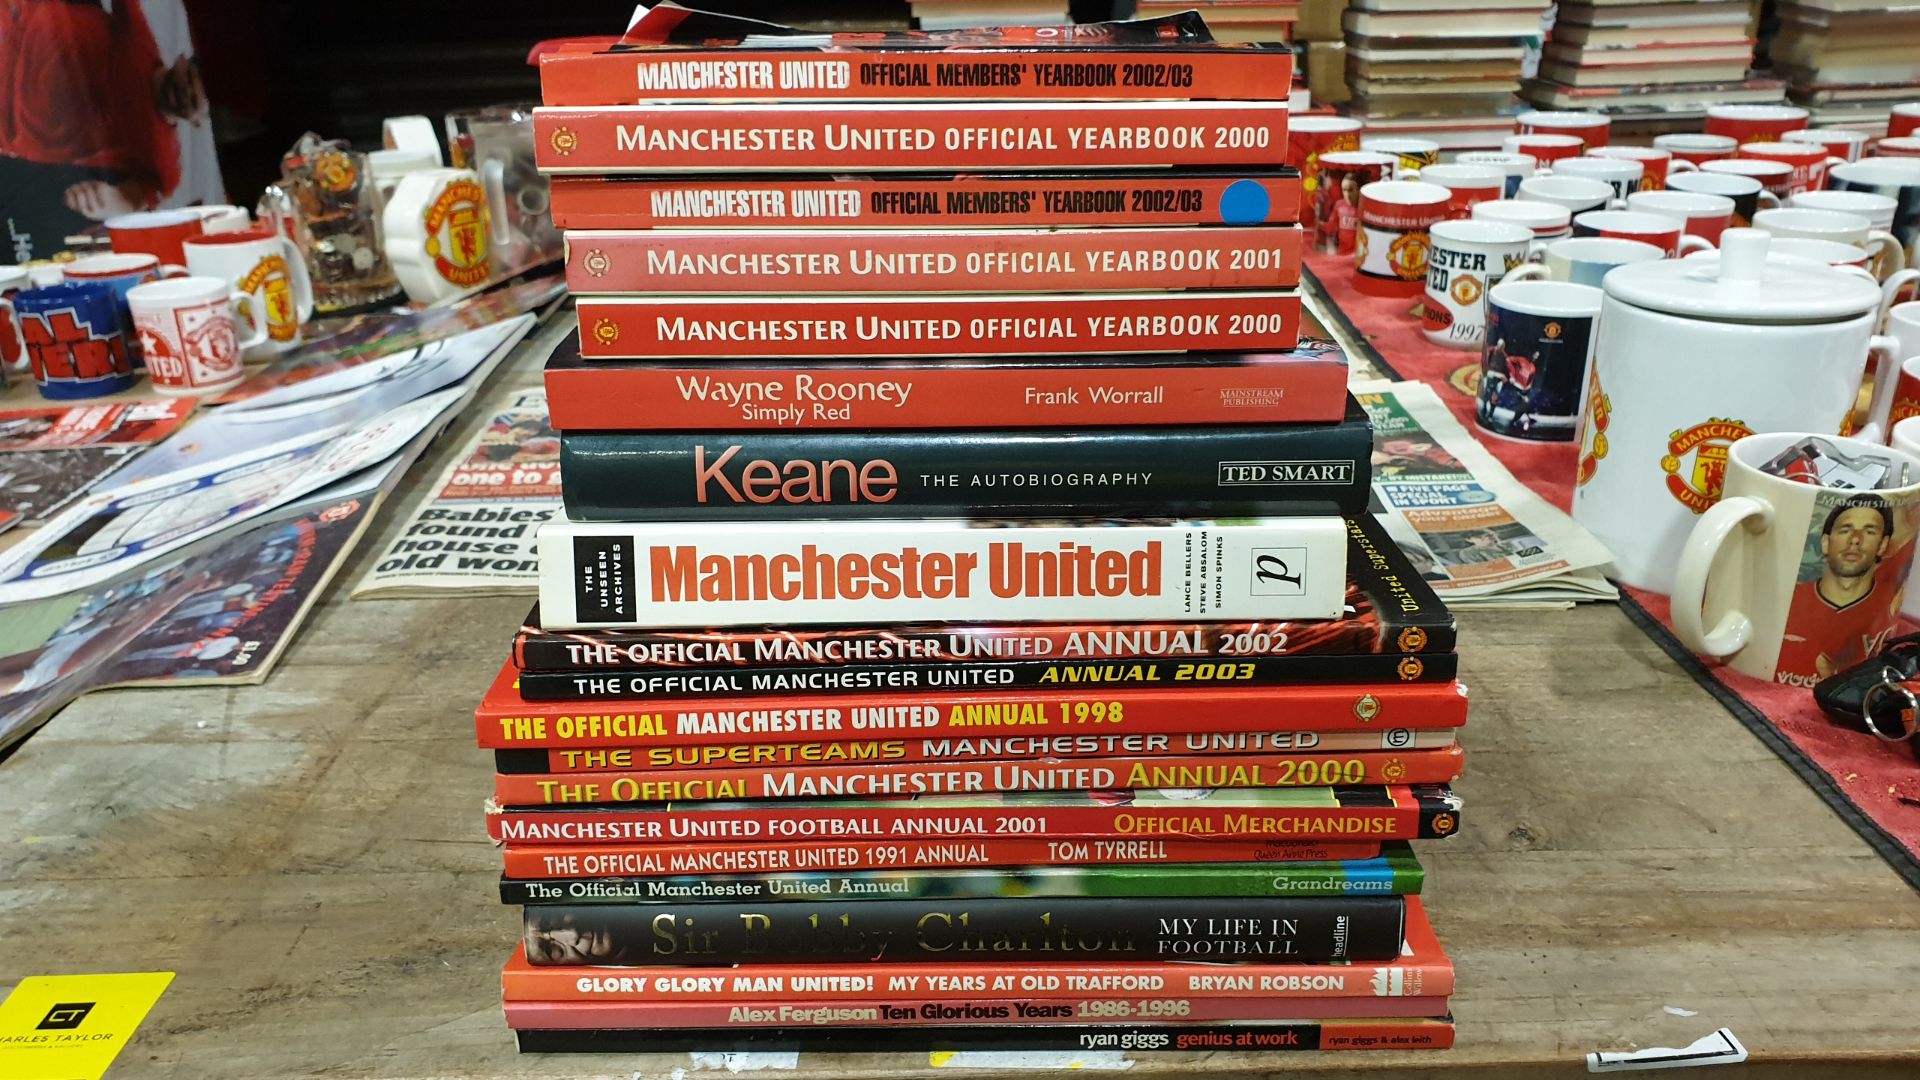 20 PIECE ASSORTED MANCHESTER UNITED BOOK LOT INCLUDING. WAYNE ROONEY SIMPLY RED BY FRANK WORRALL